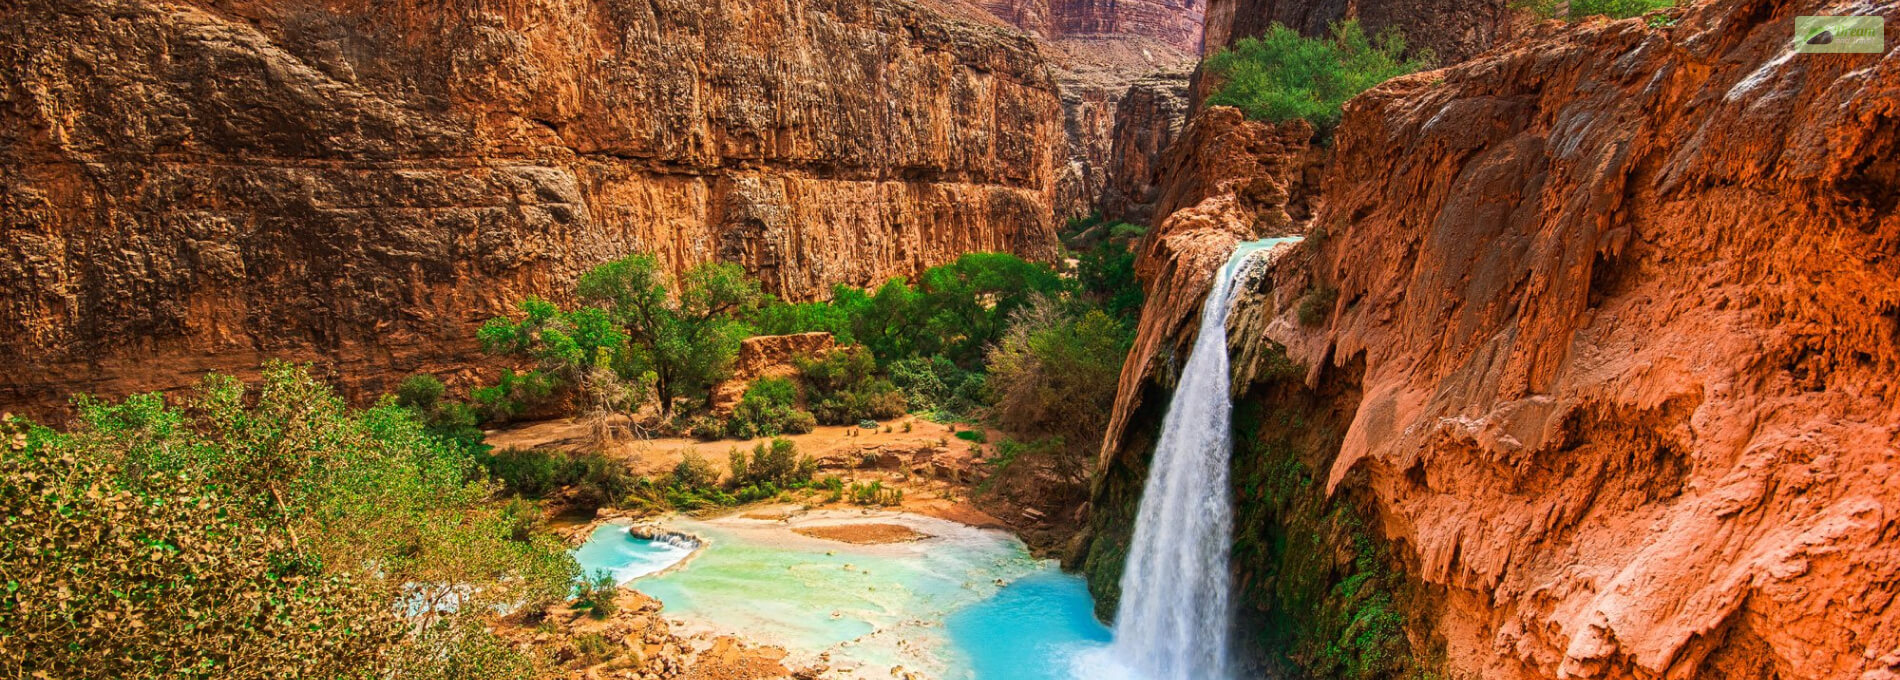 Exploring the Natural Wonders A Guide to the National Parks in Arizona